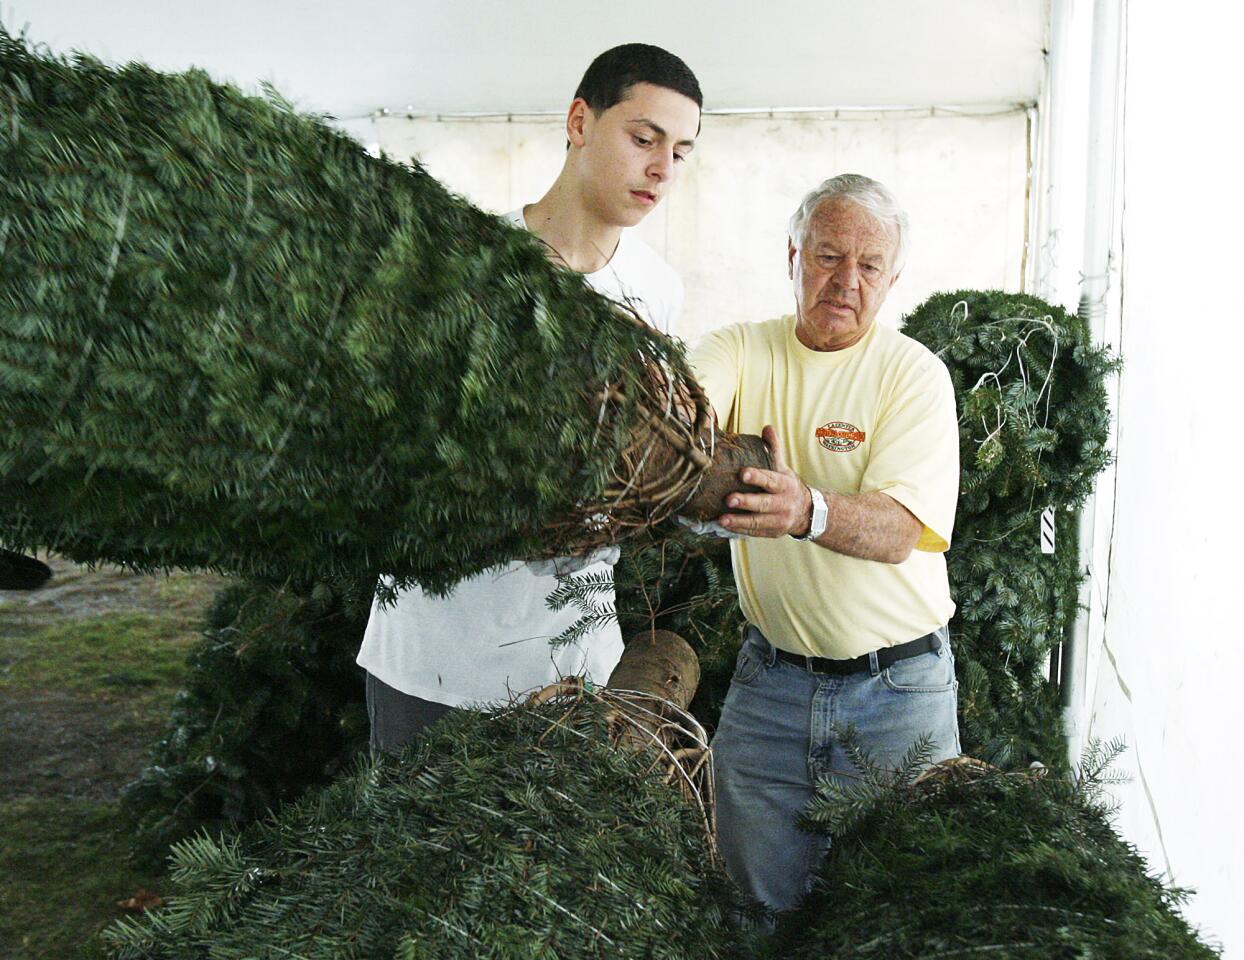 Harry Avetisyan, 16, brings a Christmas tree to Gary Casella, the owner of Casellas Christmas Trees in Burbank in back of Burbank High School on Tuesday, November 27, 2012. Casellas has sold trees in Burbank for 75 years.